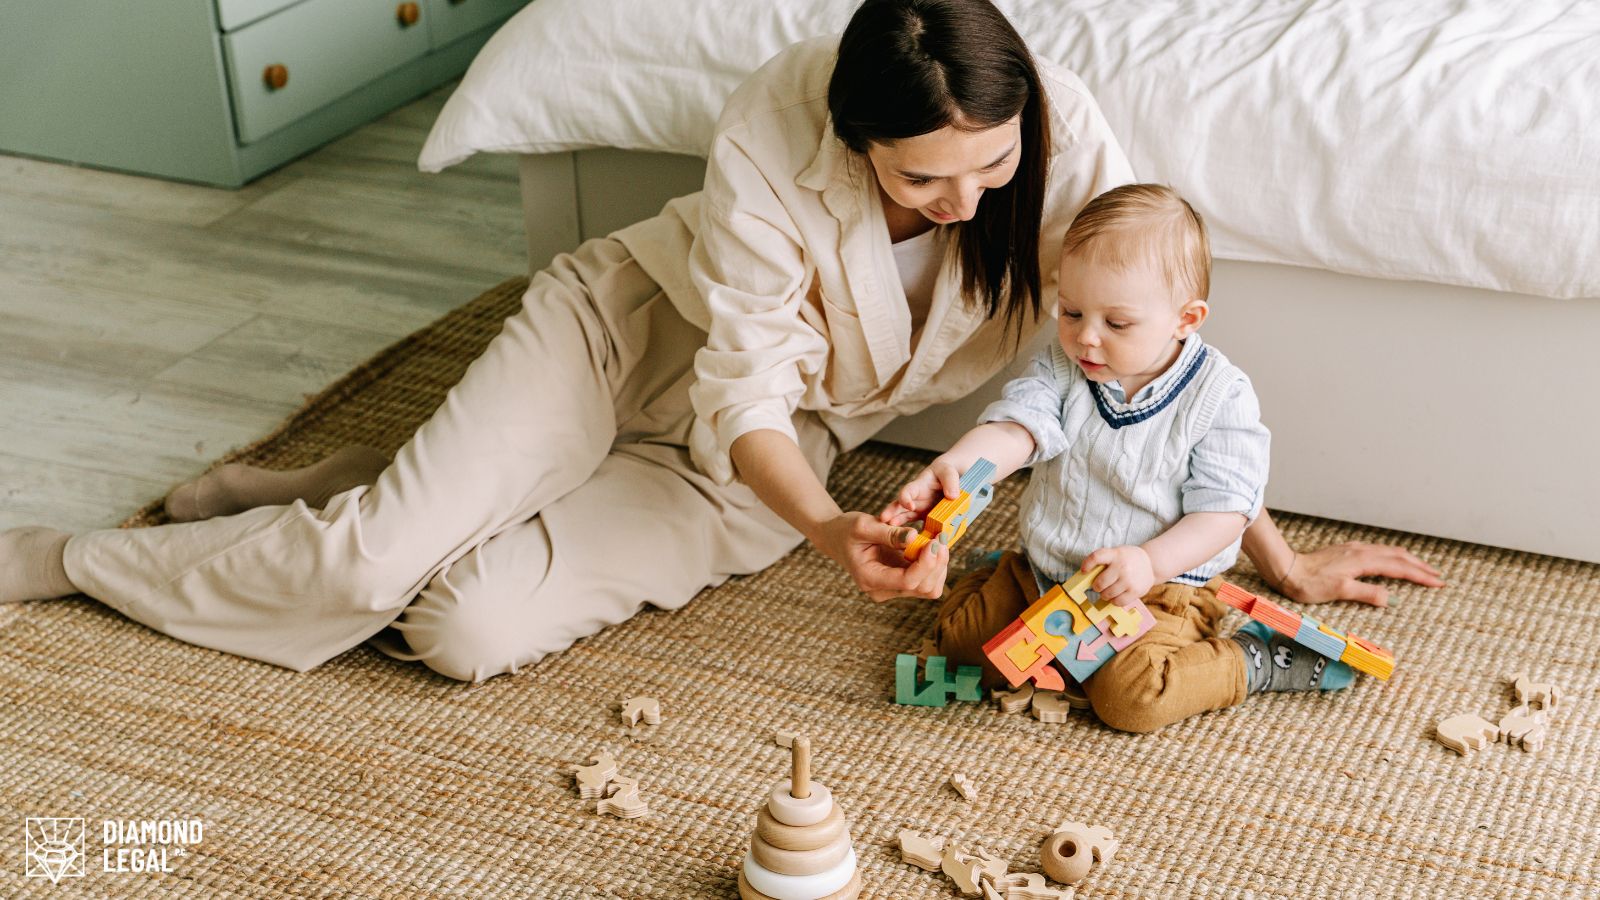 A mother playing blocks with her toddler on a carpet.